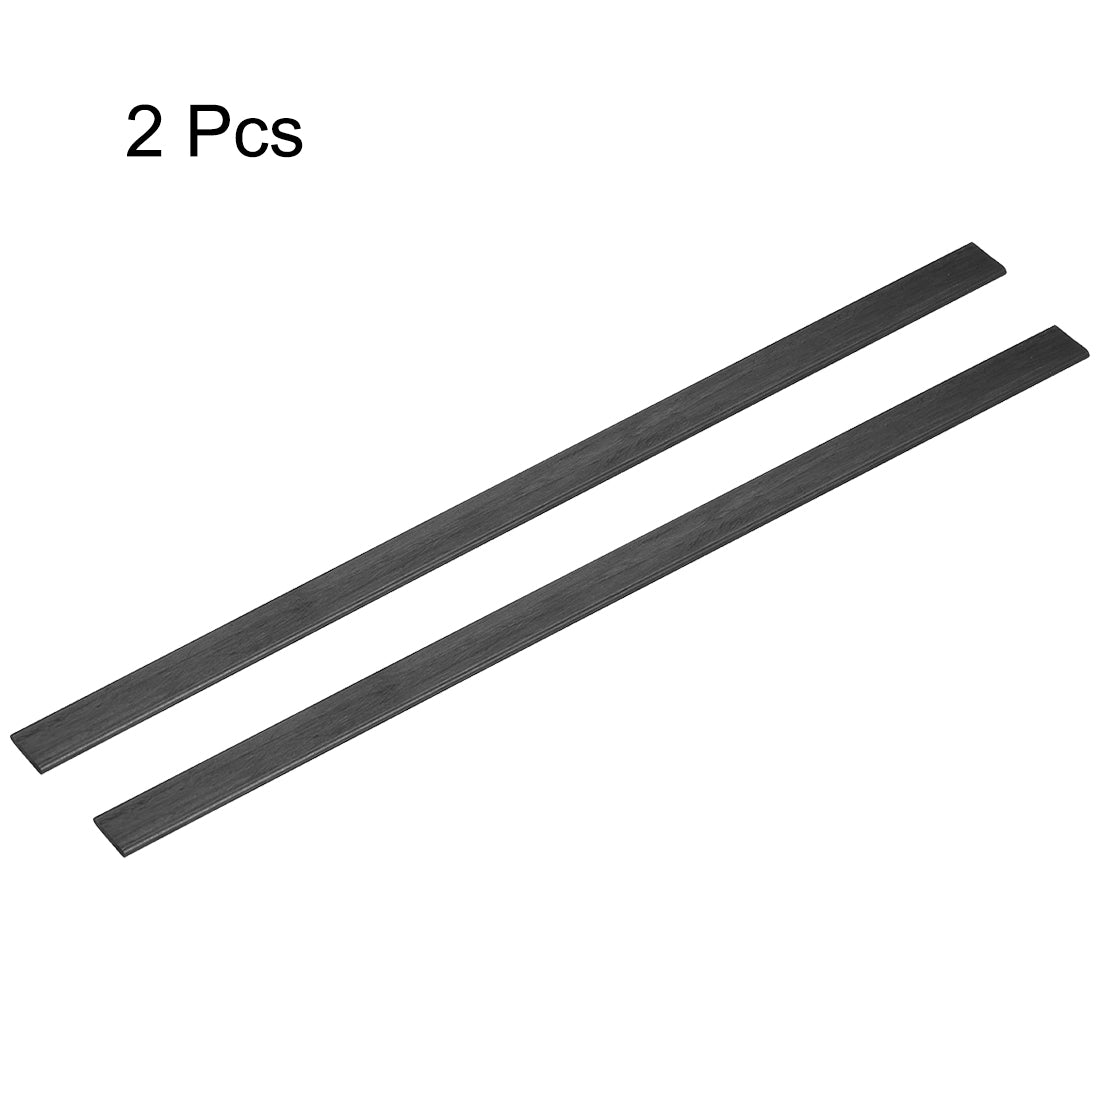 uxcell Uxcell Carbon Fiber Strip Bars 2x10mm 600mm Length Pultruded Carbon Fiber Strips for Kites, RC Airplane 2 Pcs